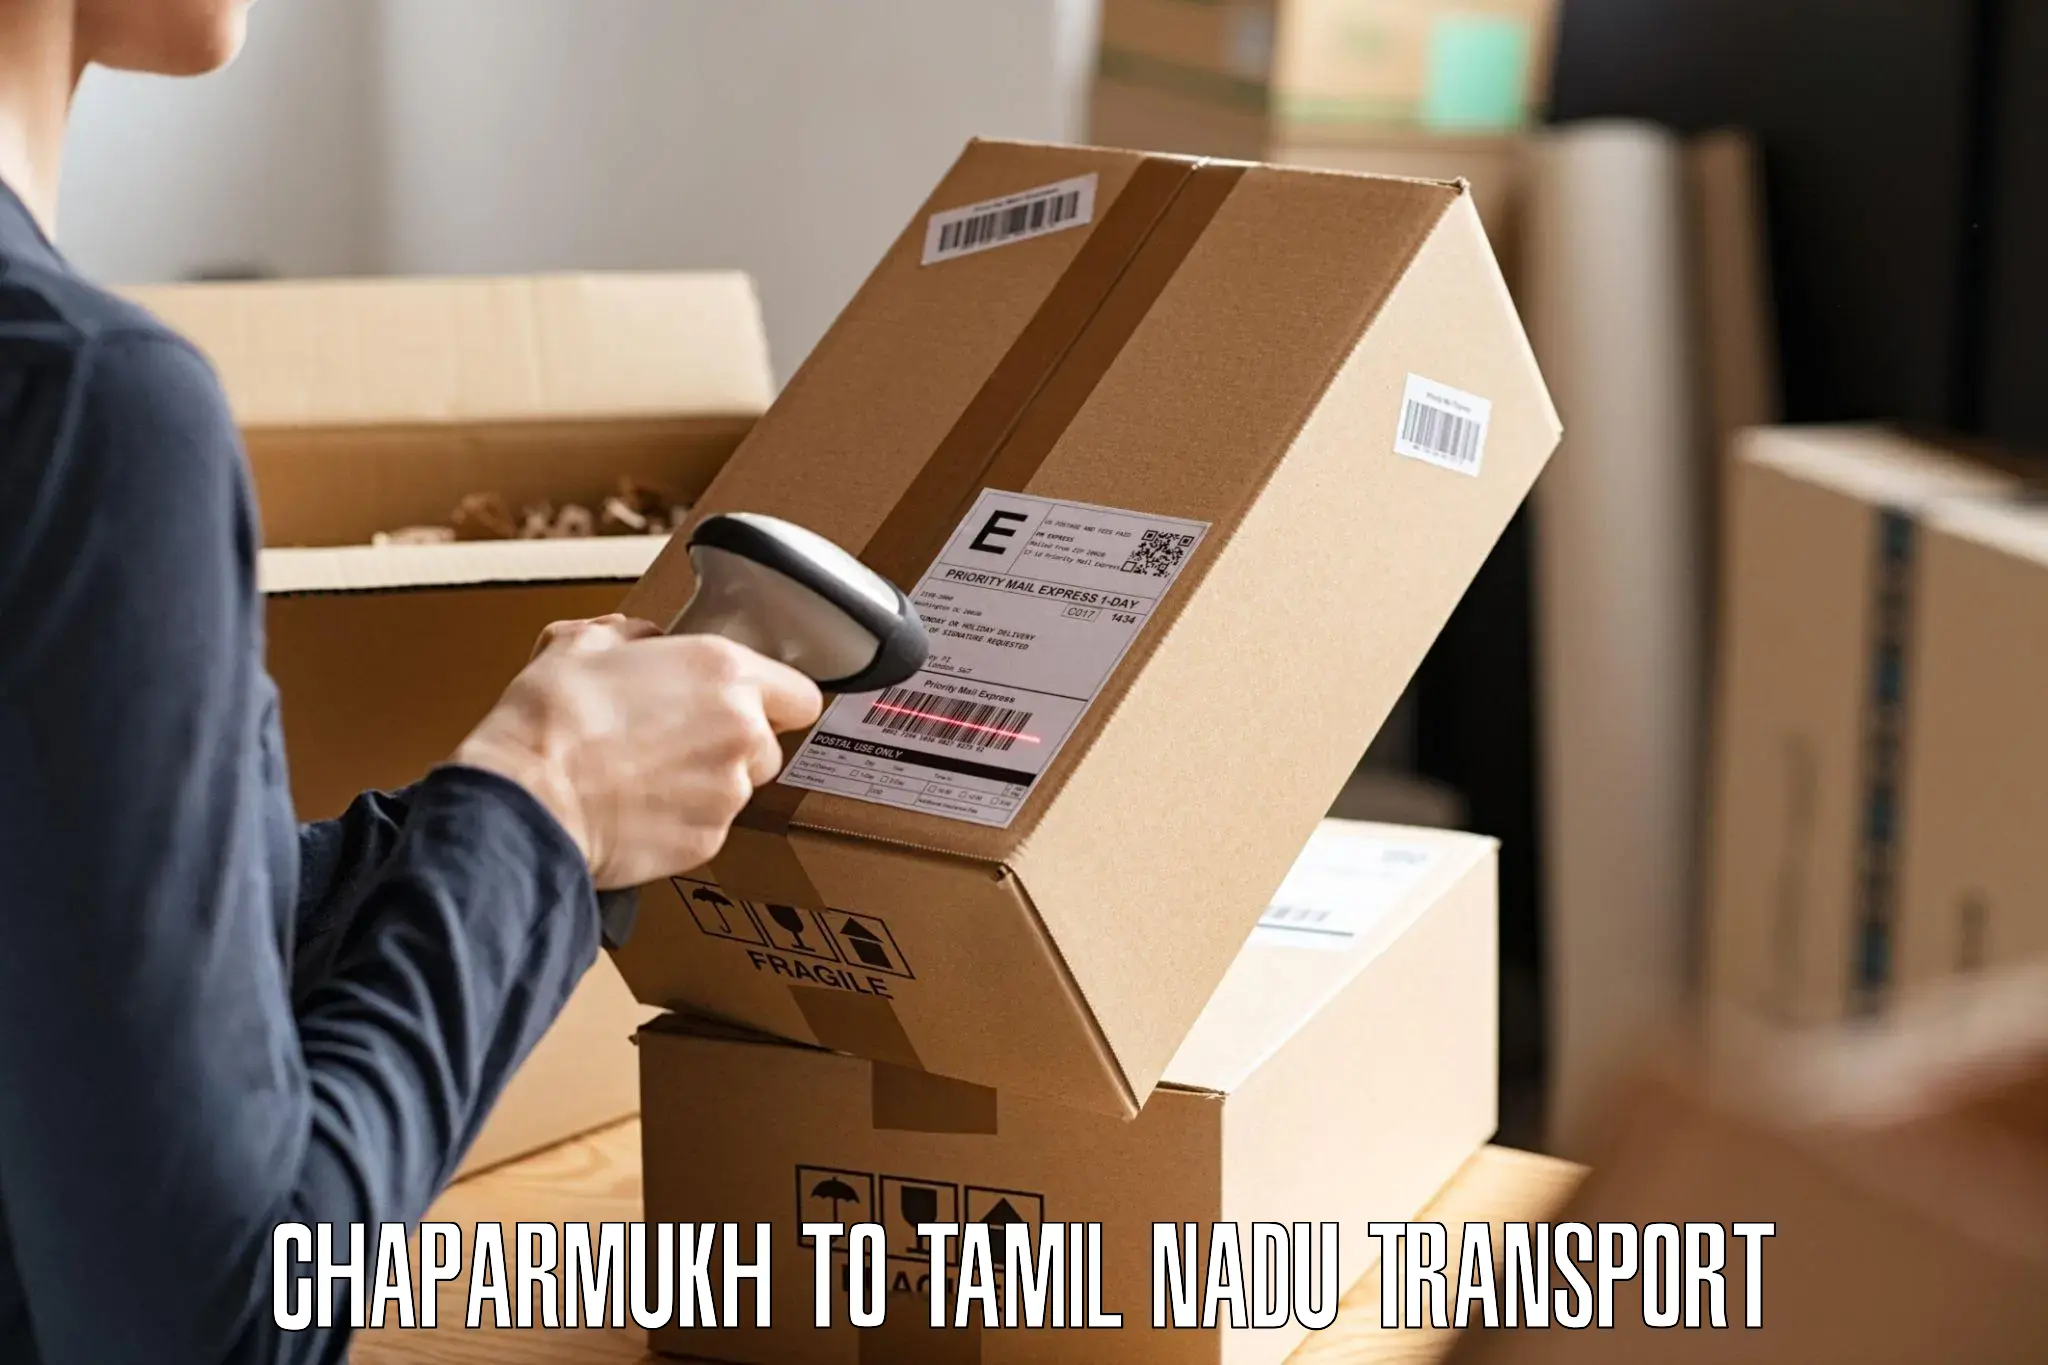 Air freight transport services Chaparmukh to Vallioor